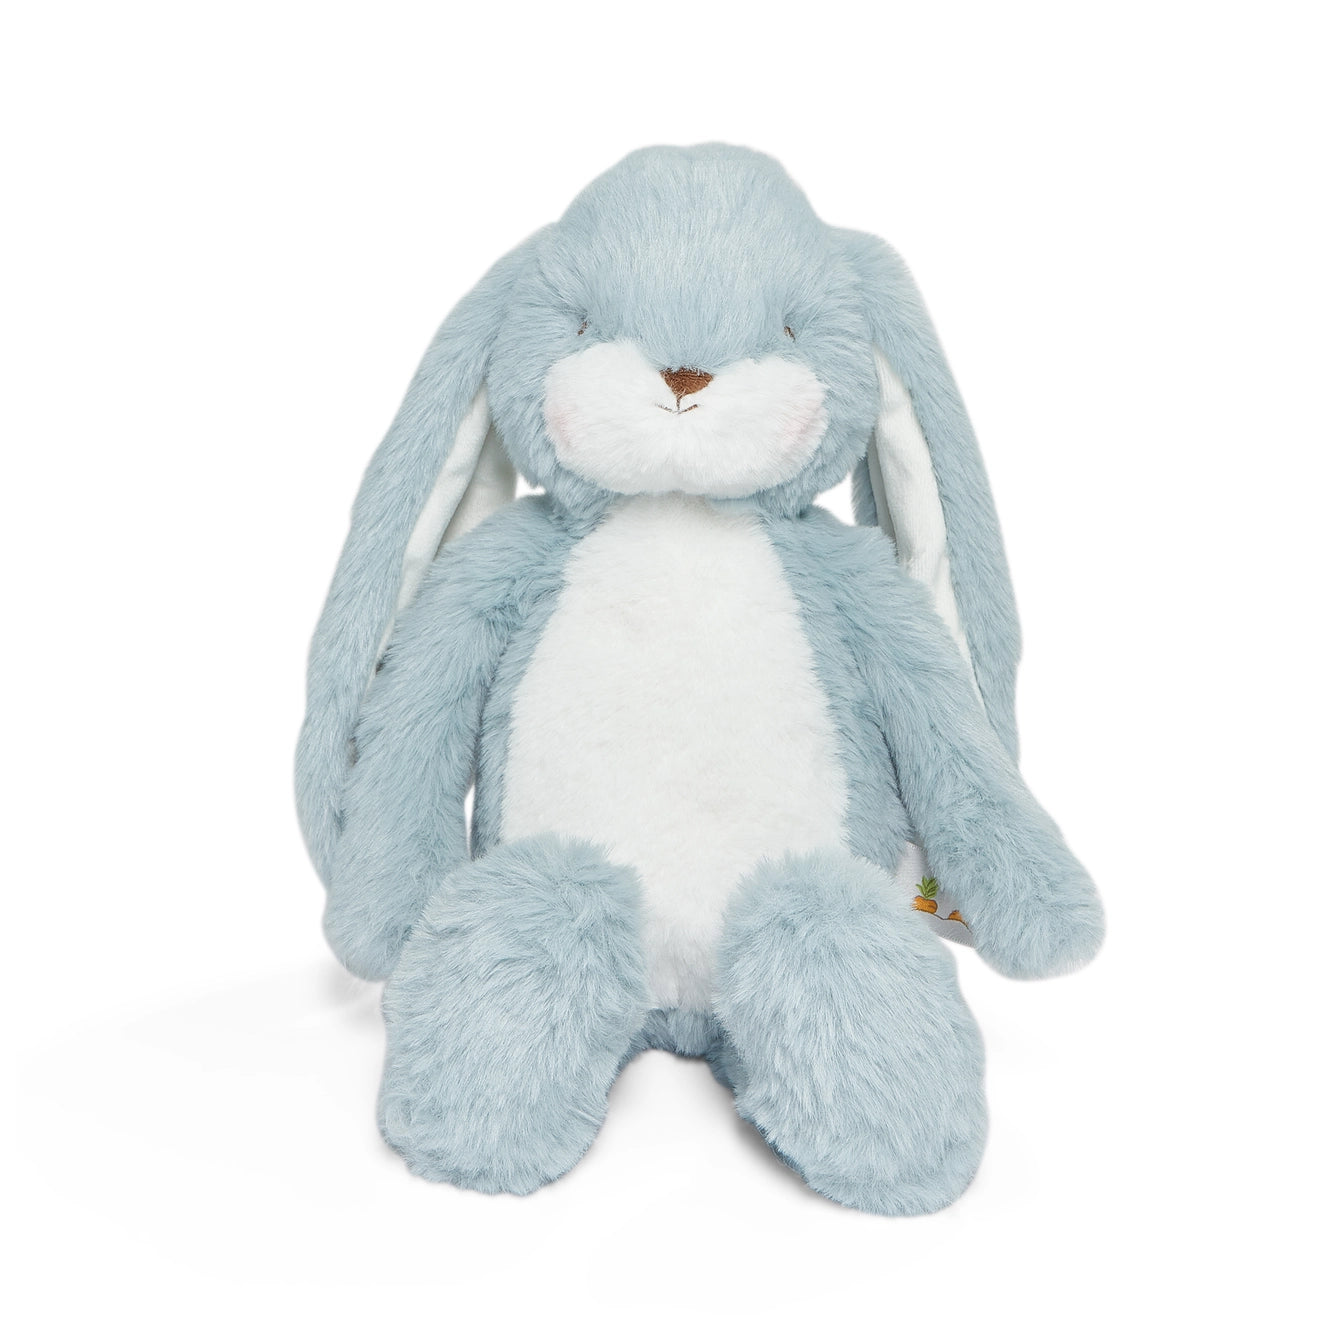 12" Personalized Easter Bunnies